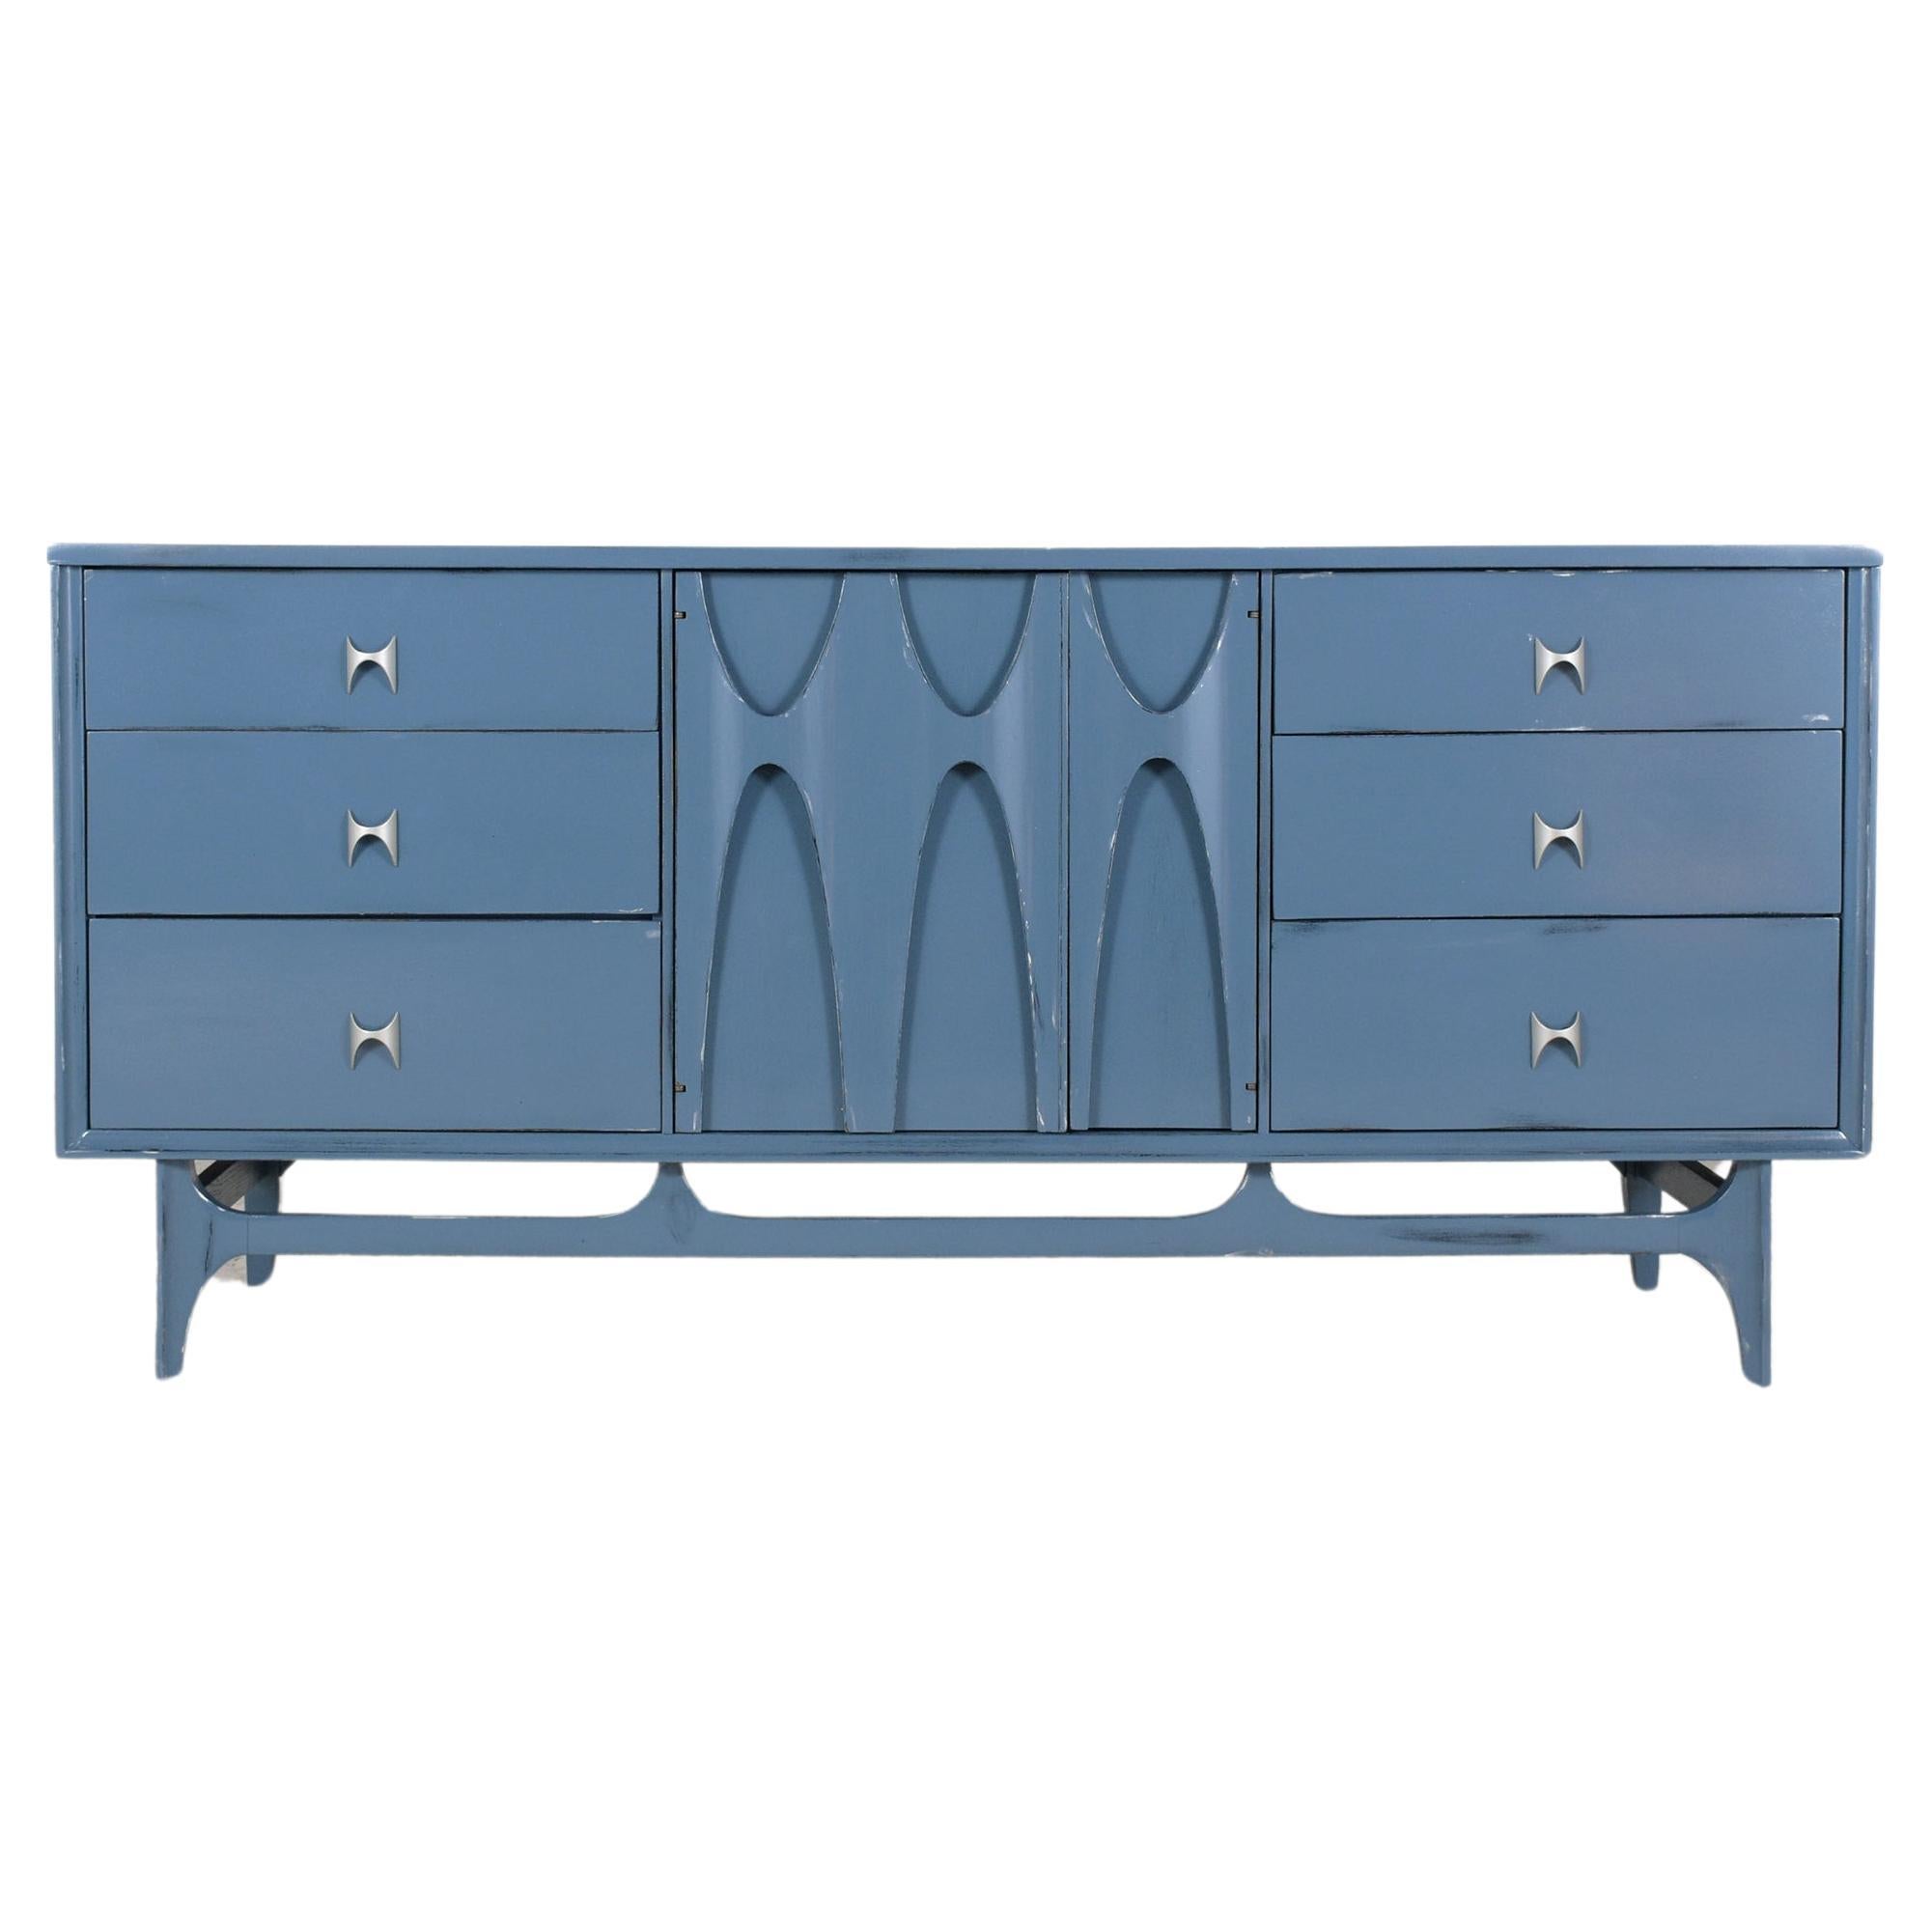 Rediscover the 1960s elegance with our exquisitely restored Broyhill Brasilia credenza, a testament to the enduring allure of mid-century modern design. Our skilled artisans have meticulously revitalized this piece, now adorned with vibrant custom